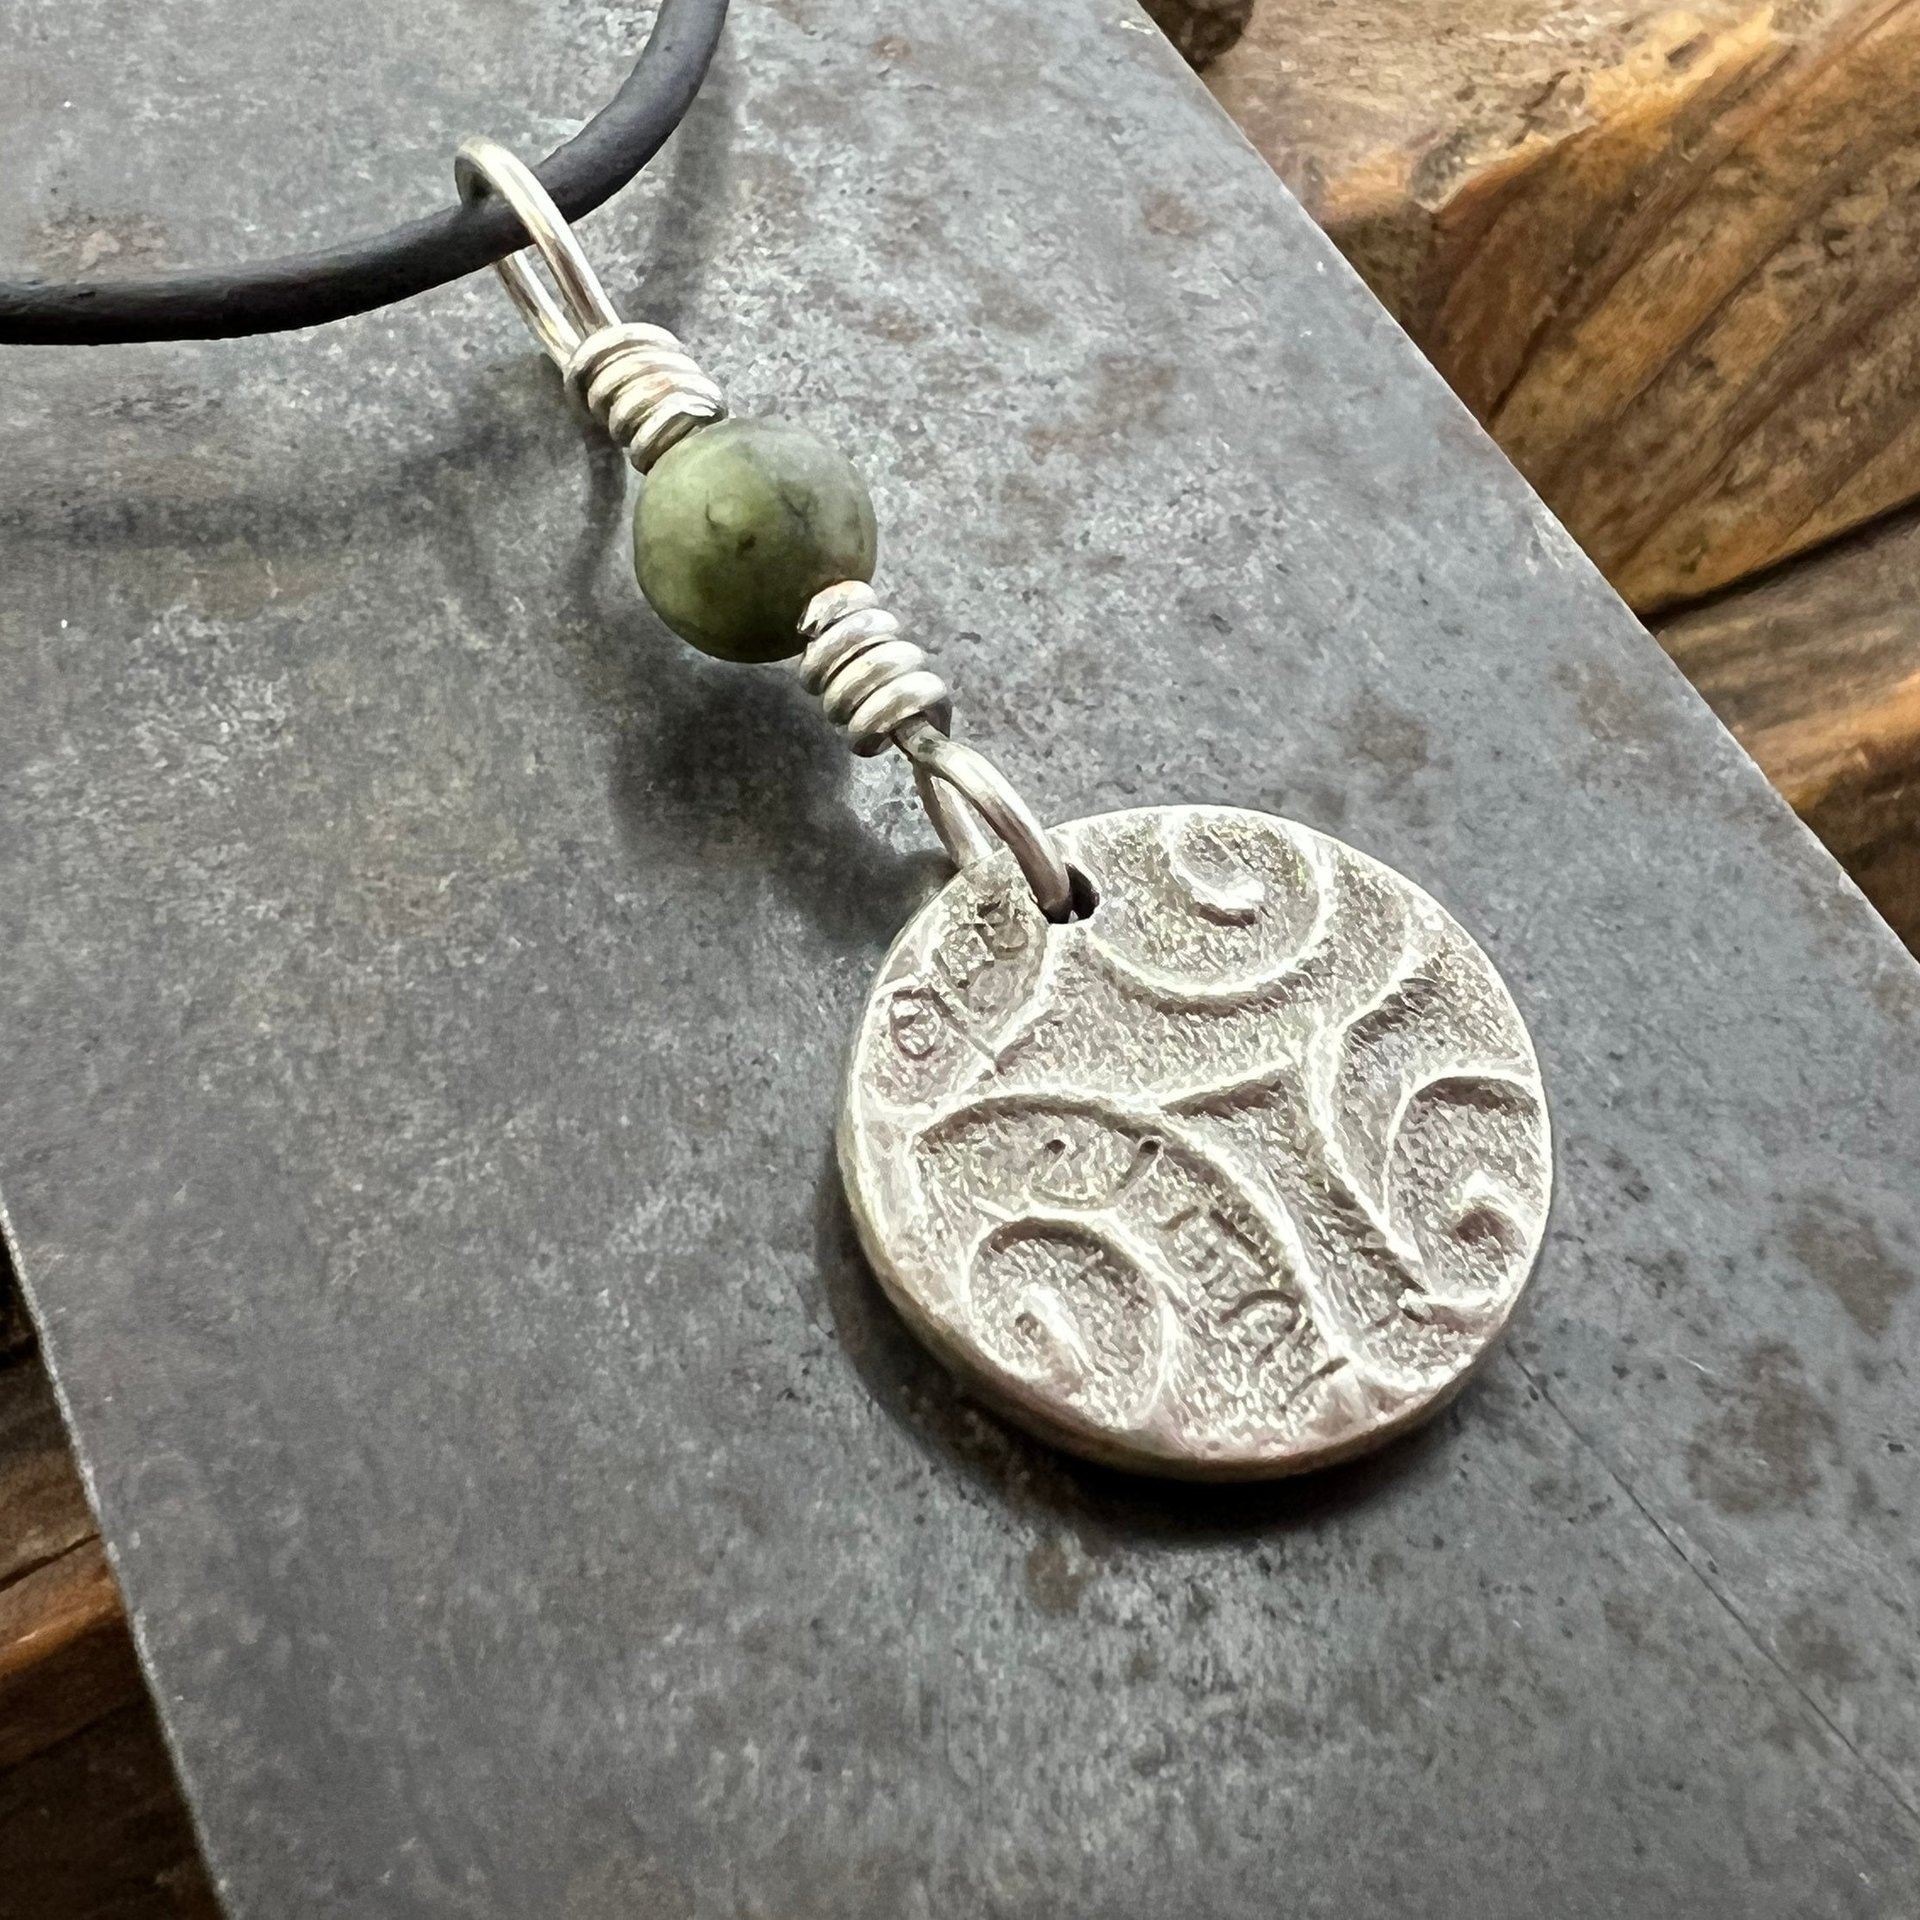 Four Leaf Clover, Sterling Silver, Wax Seal Charm, Connemara Marble, Irish Celtic Jewelry, Pagan Celtic Witch, 4 Leaf, Luck of the Irish